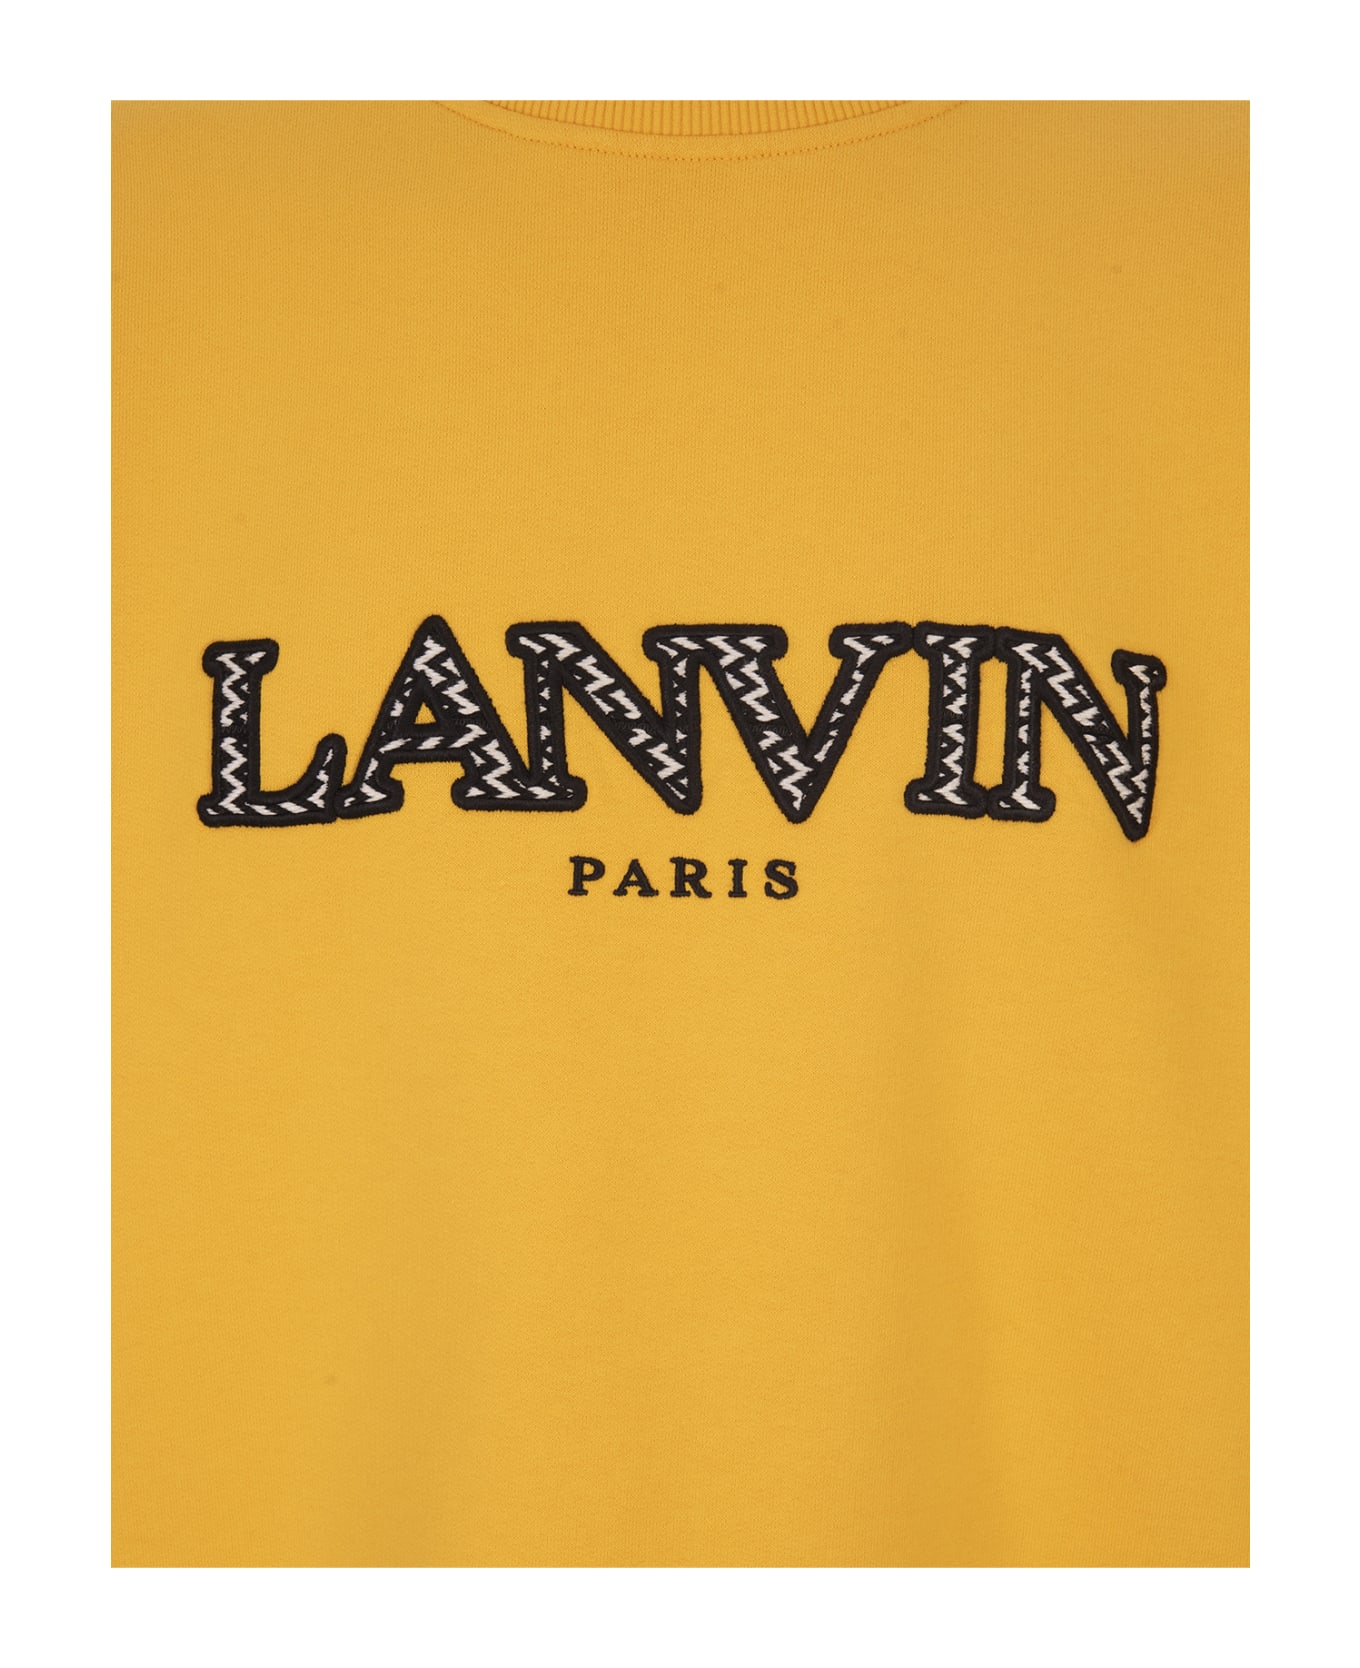 Lanvin Yellow Sweatshirt With Embroidered Lanvin Curb Logo - Yellow